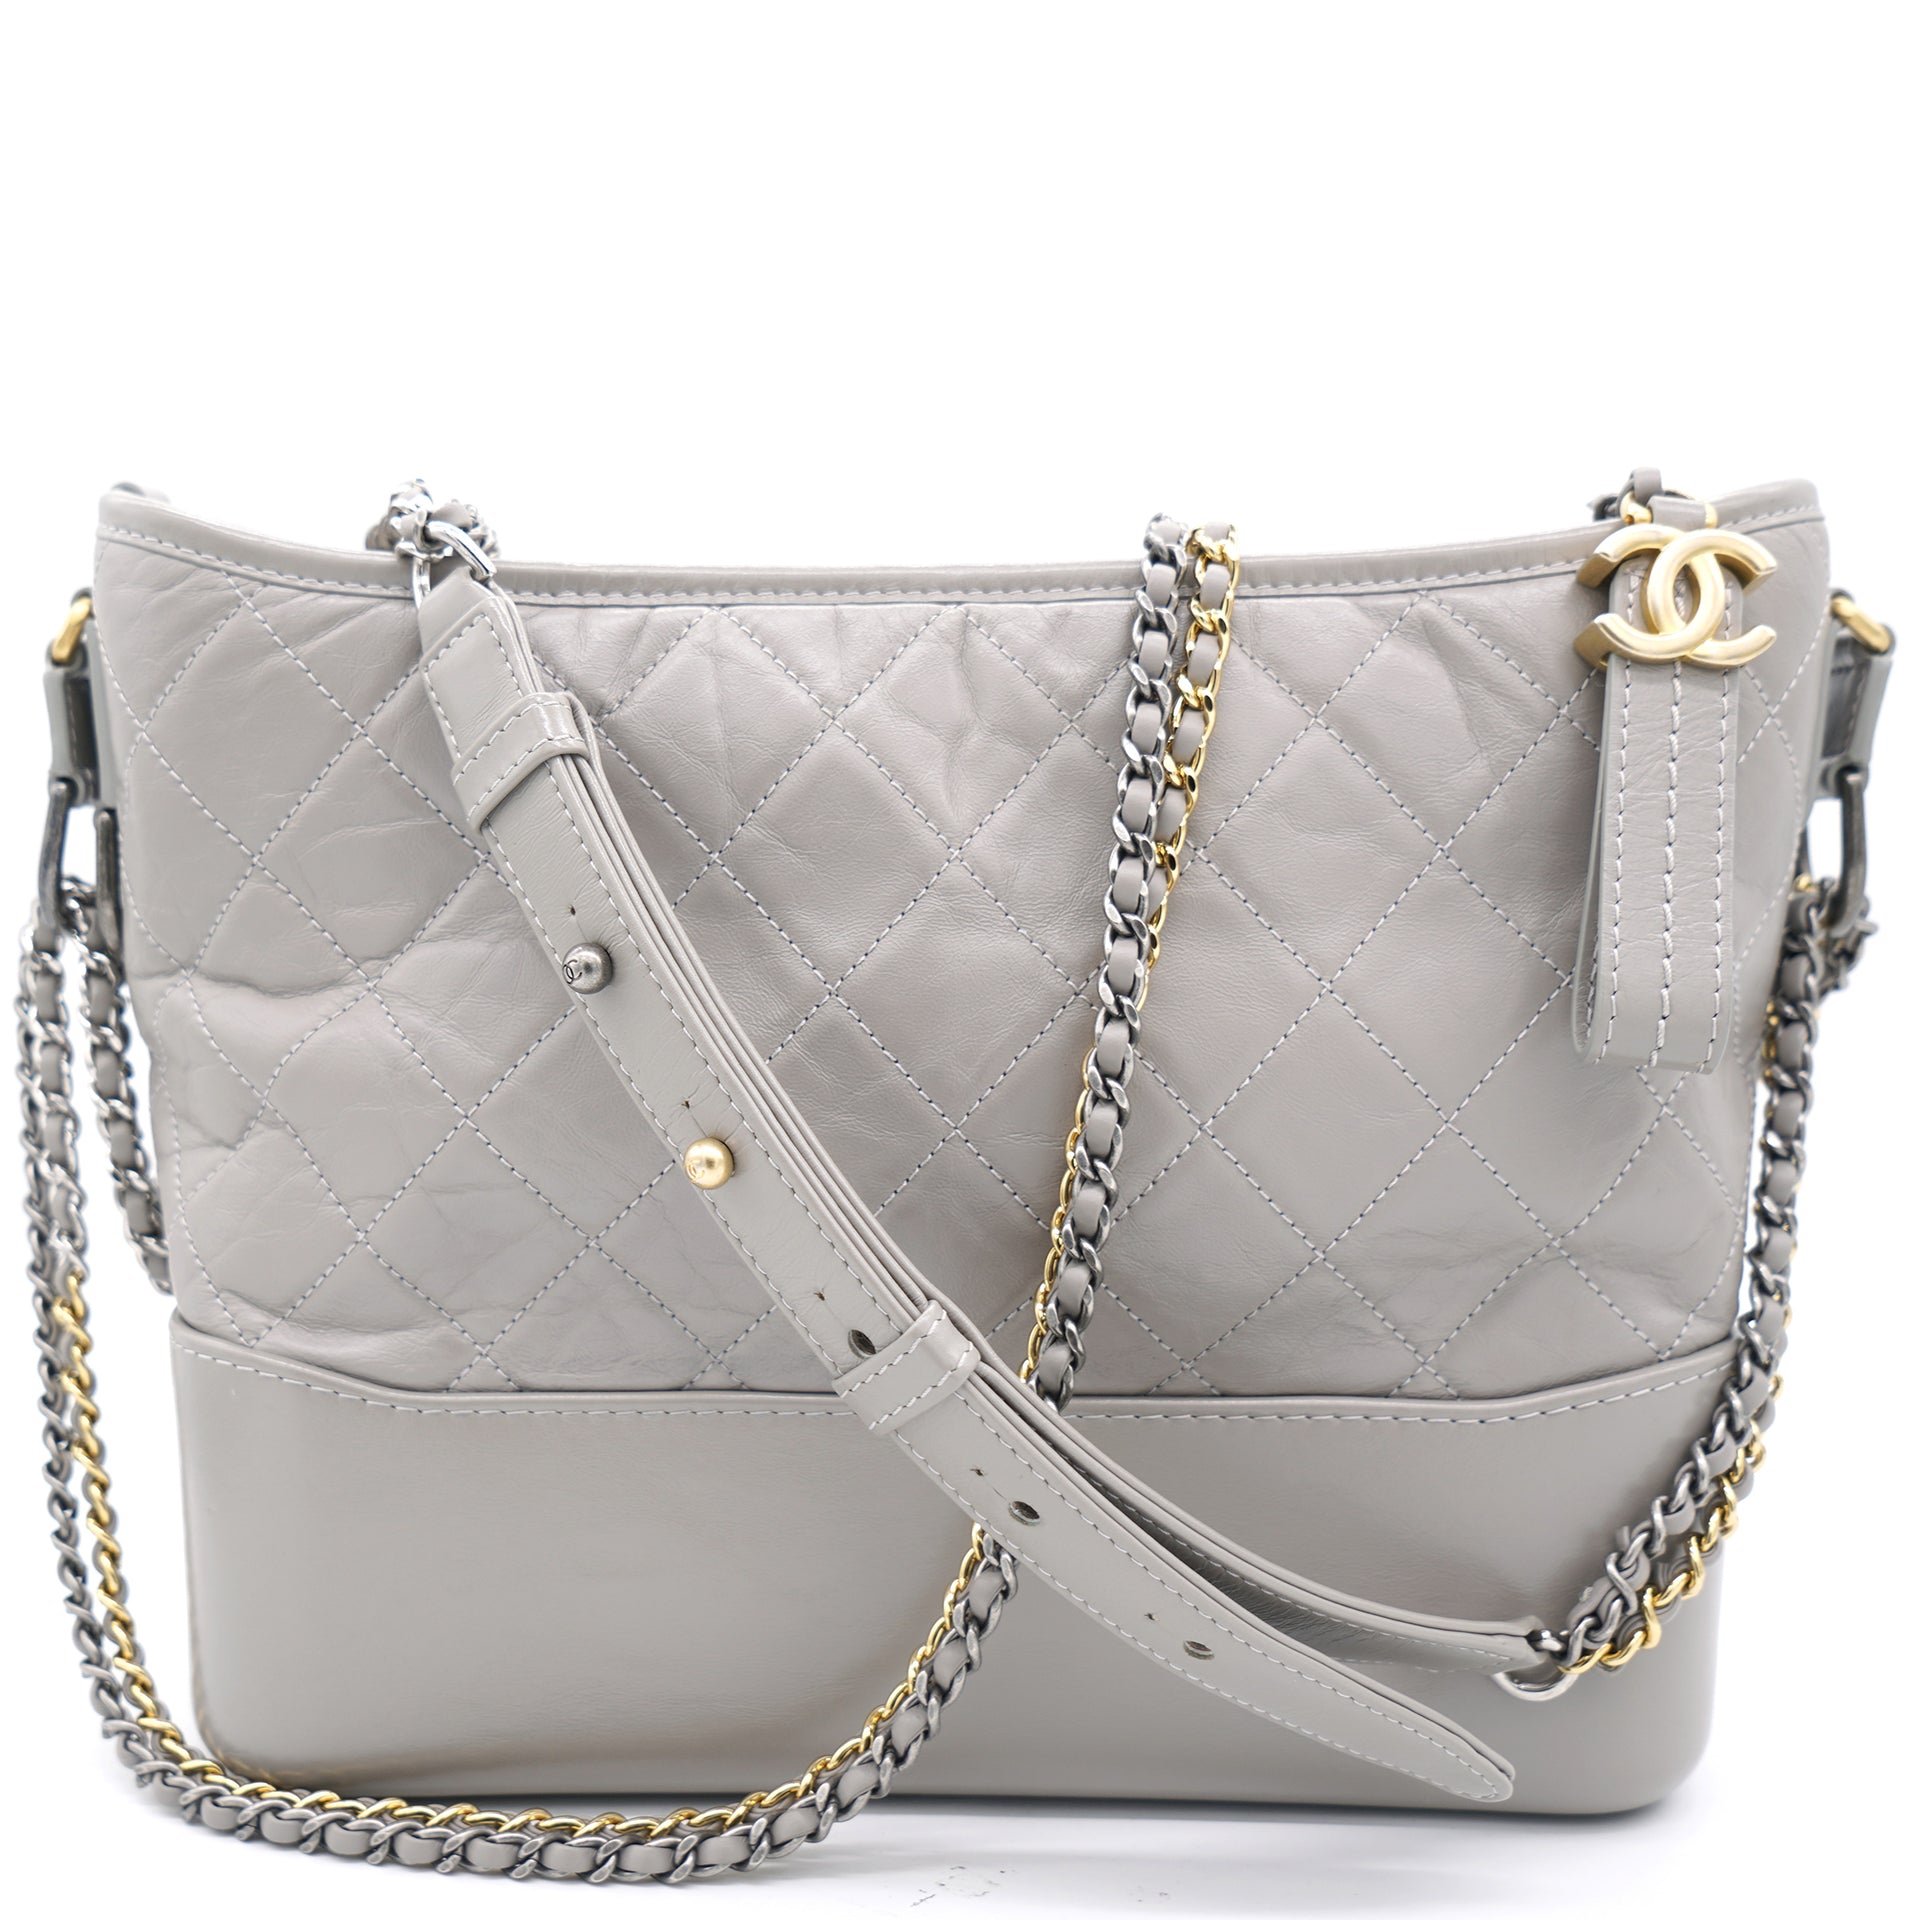 Chanel Grey Quilted Aged Calfskin Leather Gabrielle Hobo Bag